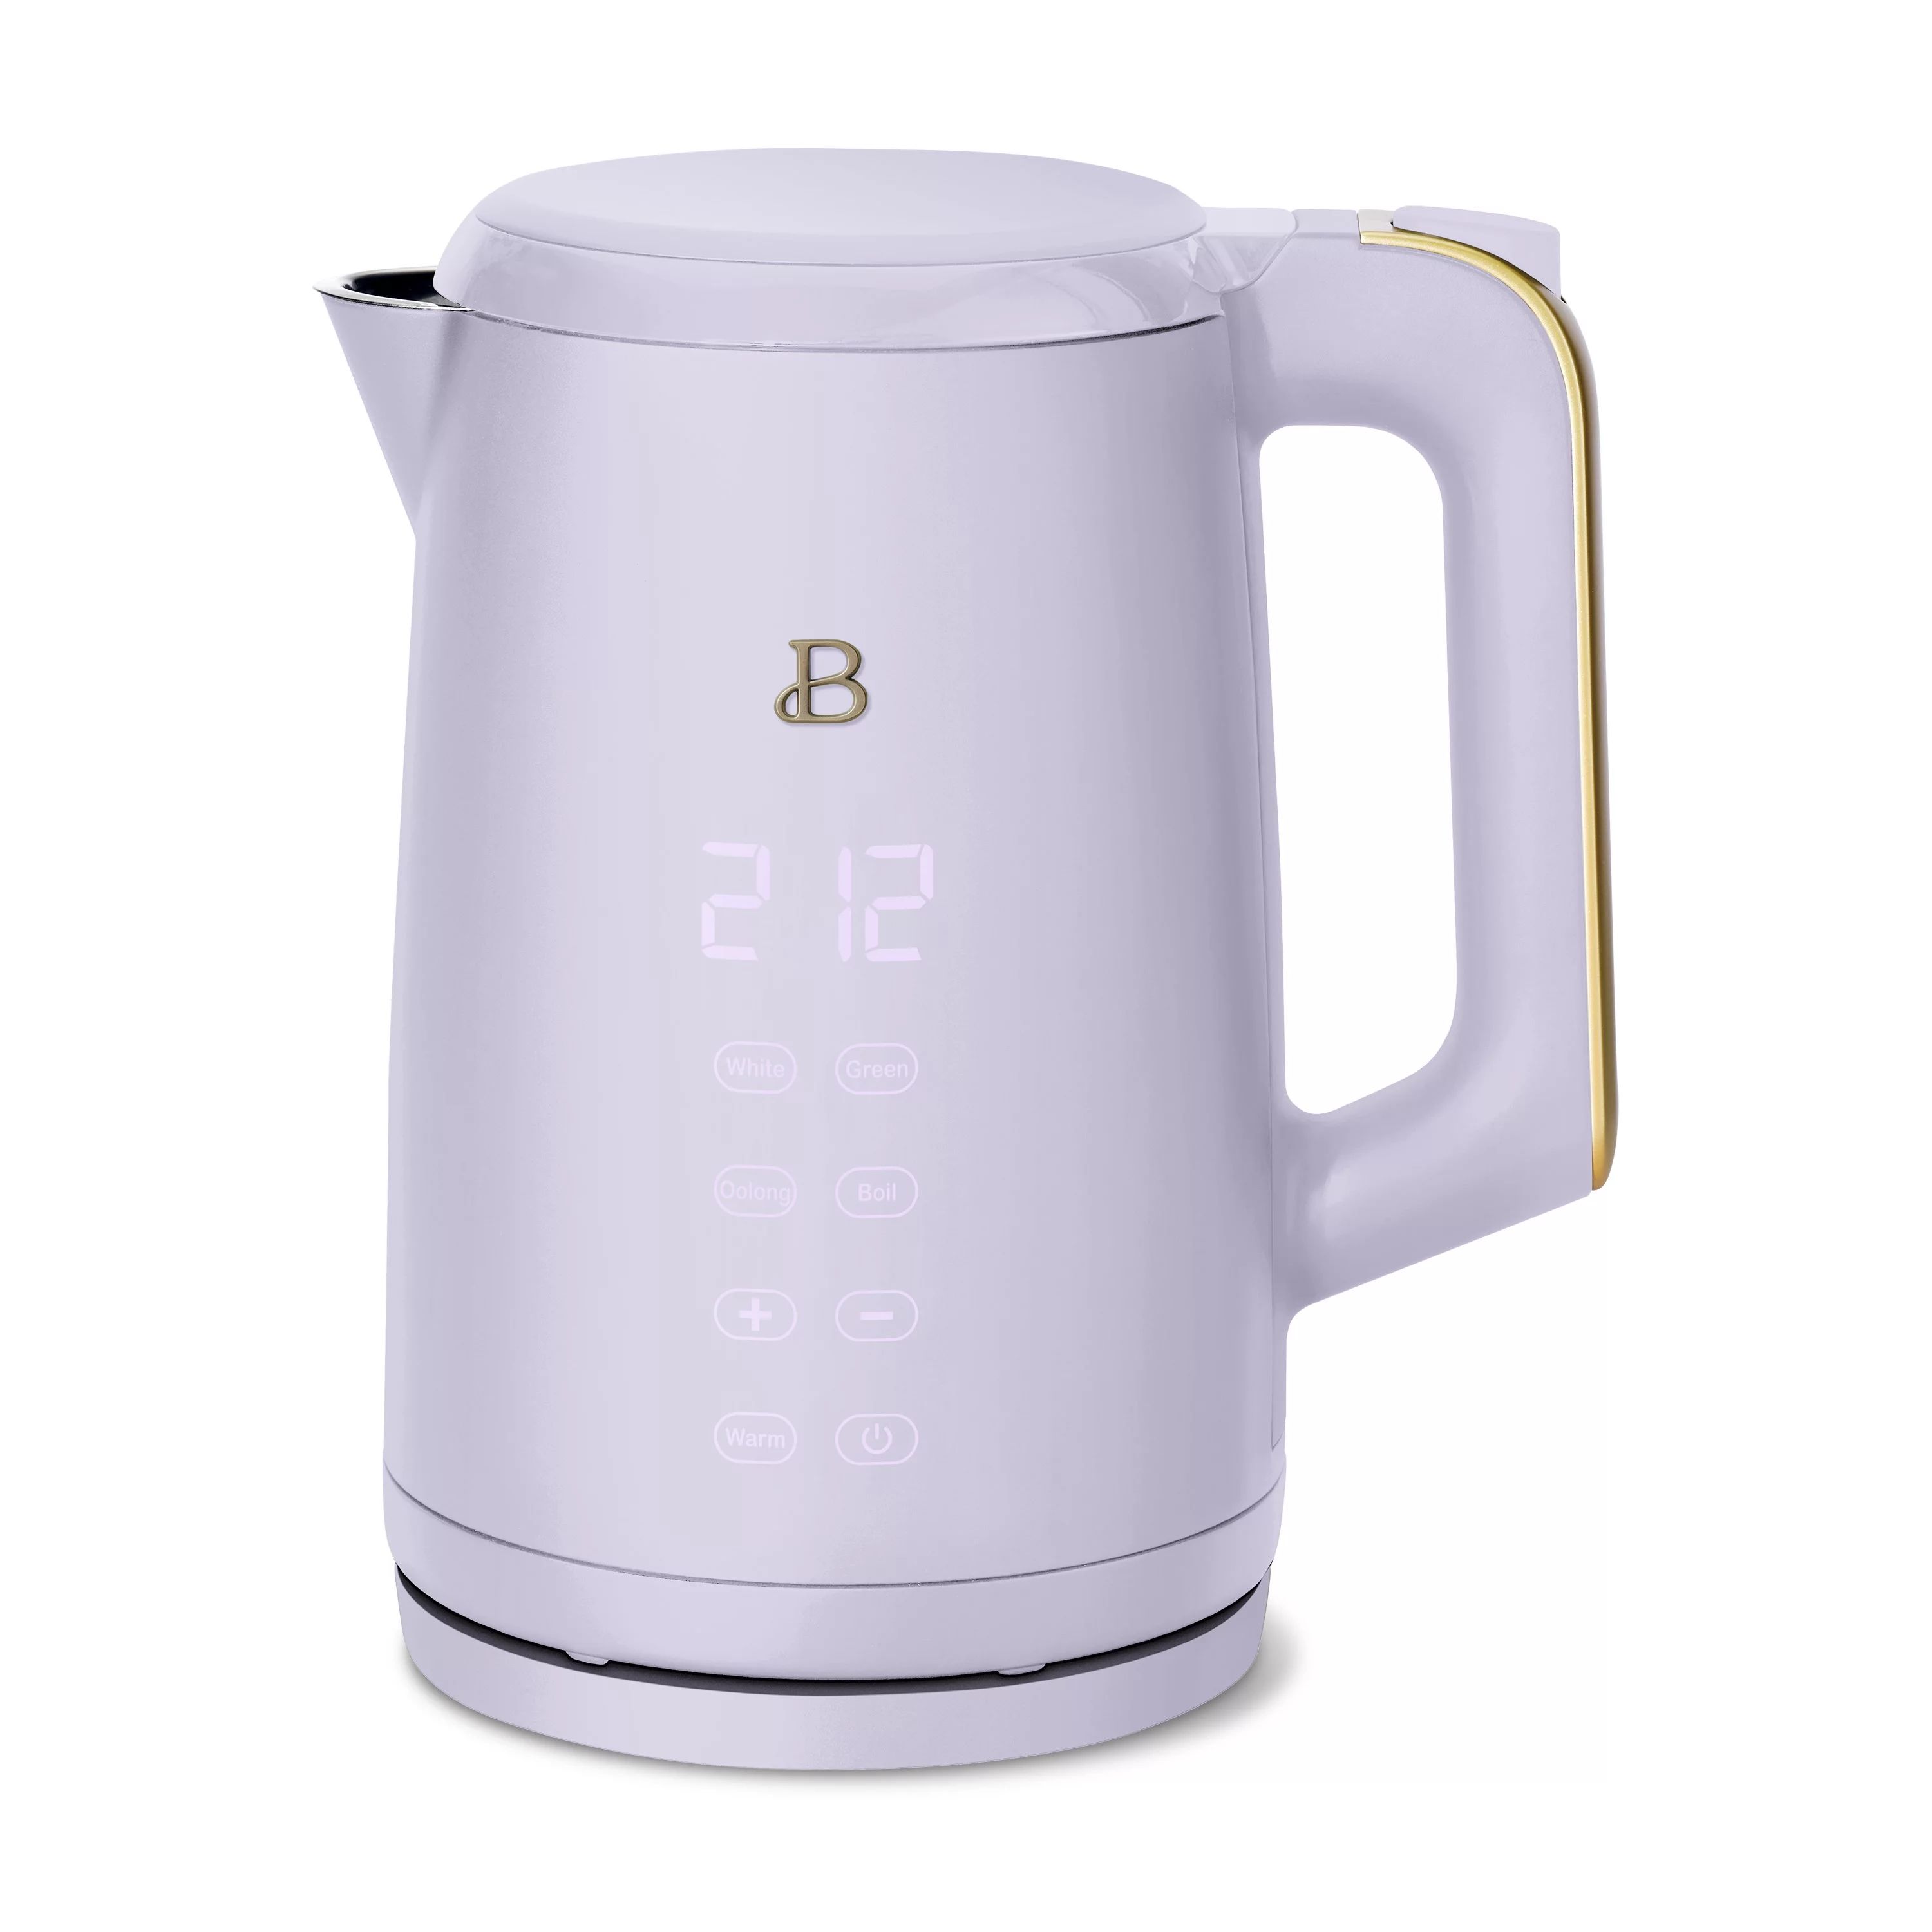 Beautiful 1.7 Liter One-Touch Electric Kettle, Lavender by Drew Barrymore | Walmart (US)